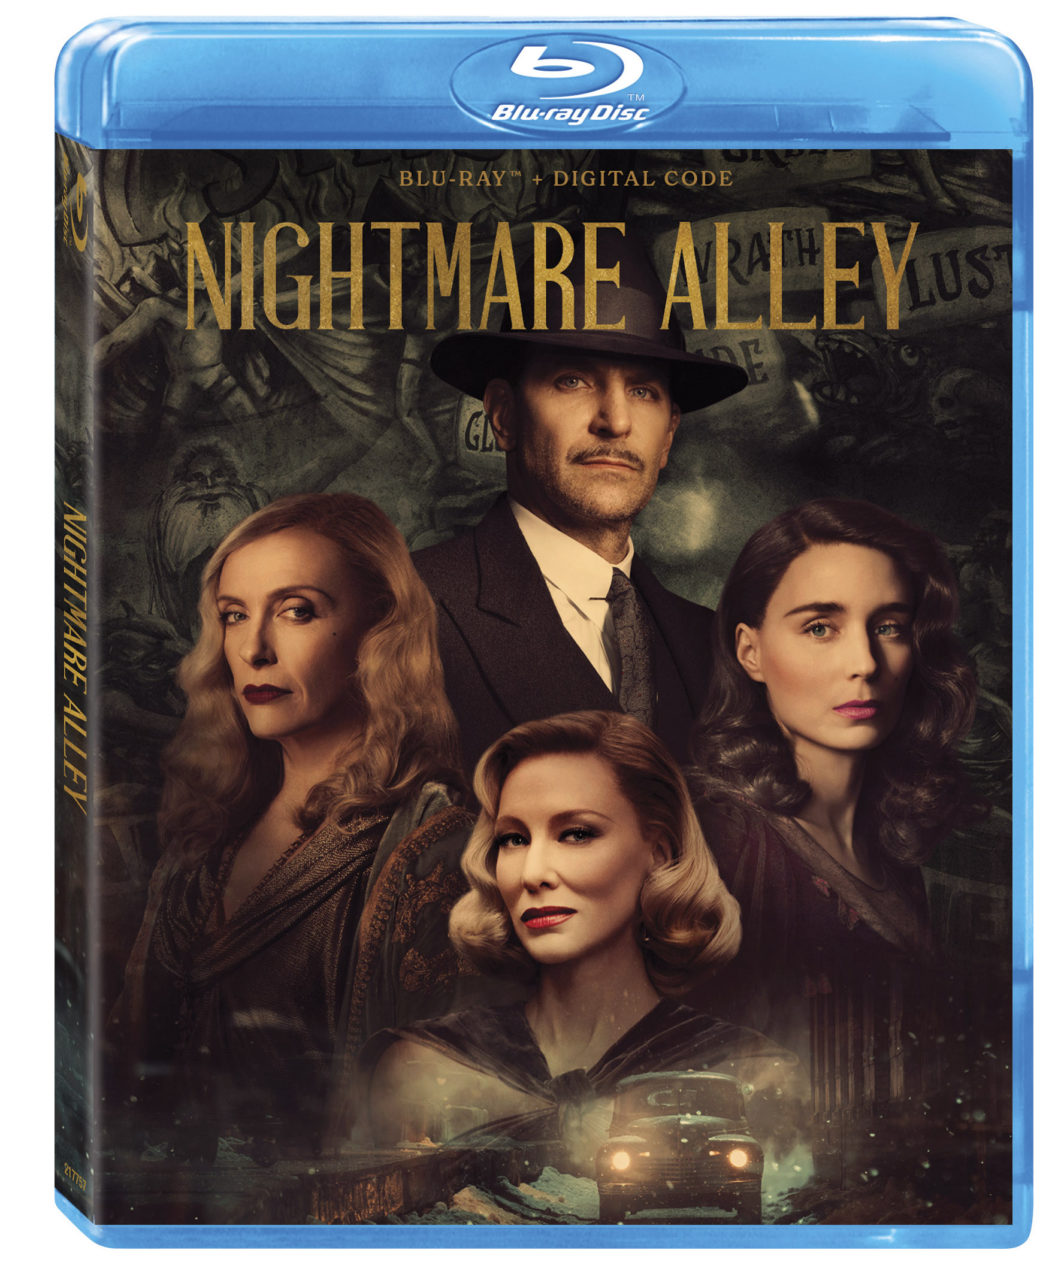 Nightmare Alley Blu-Ray Combo Pack cover (Disney)